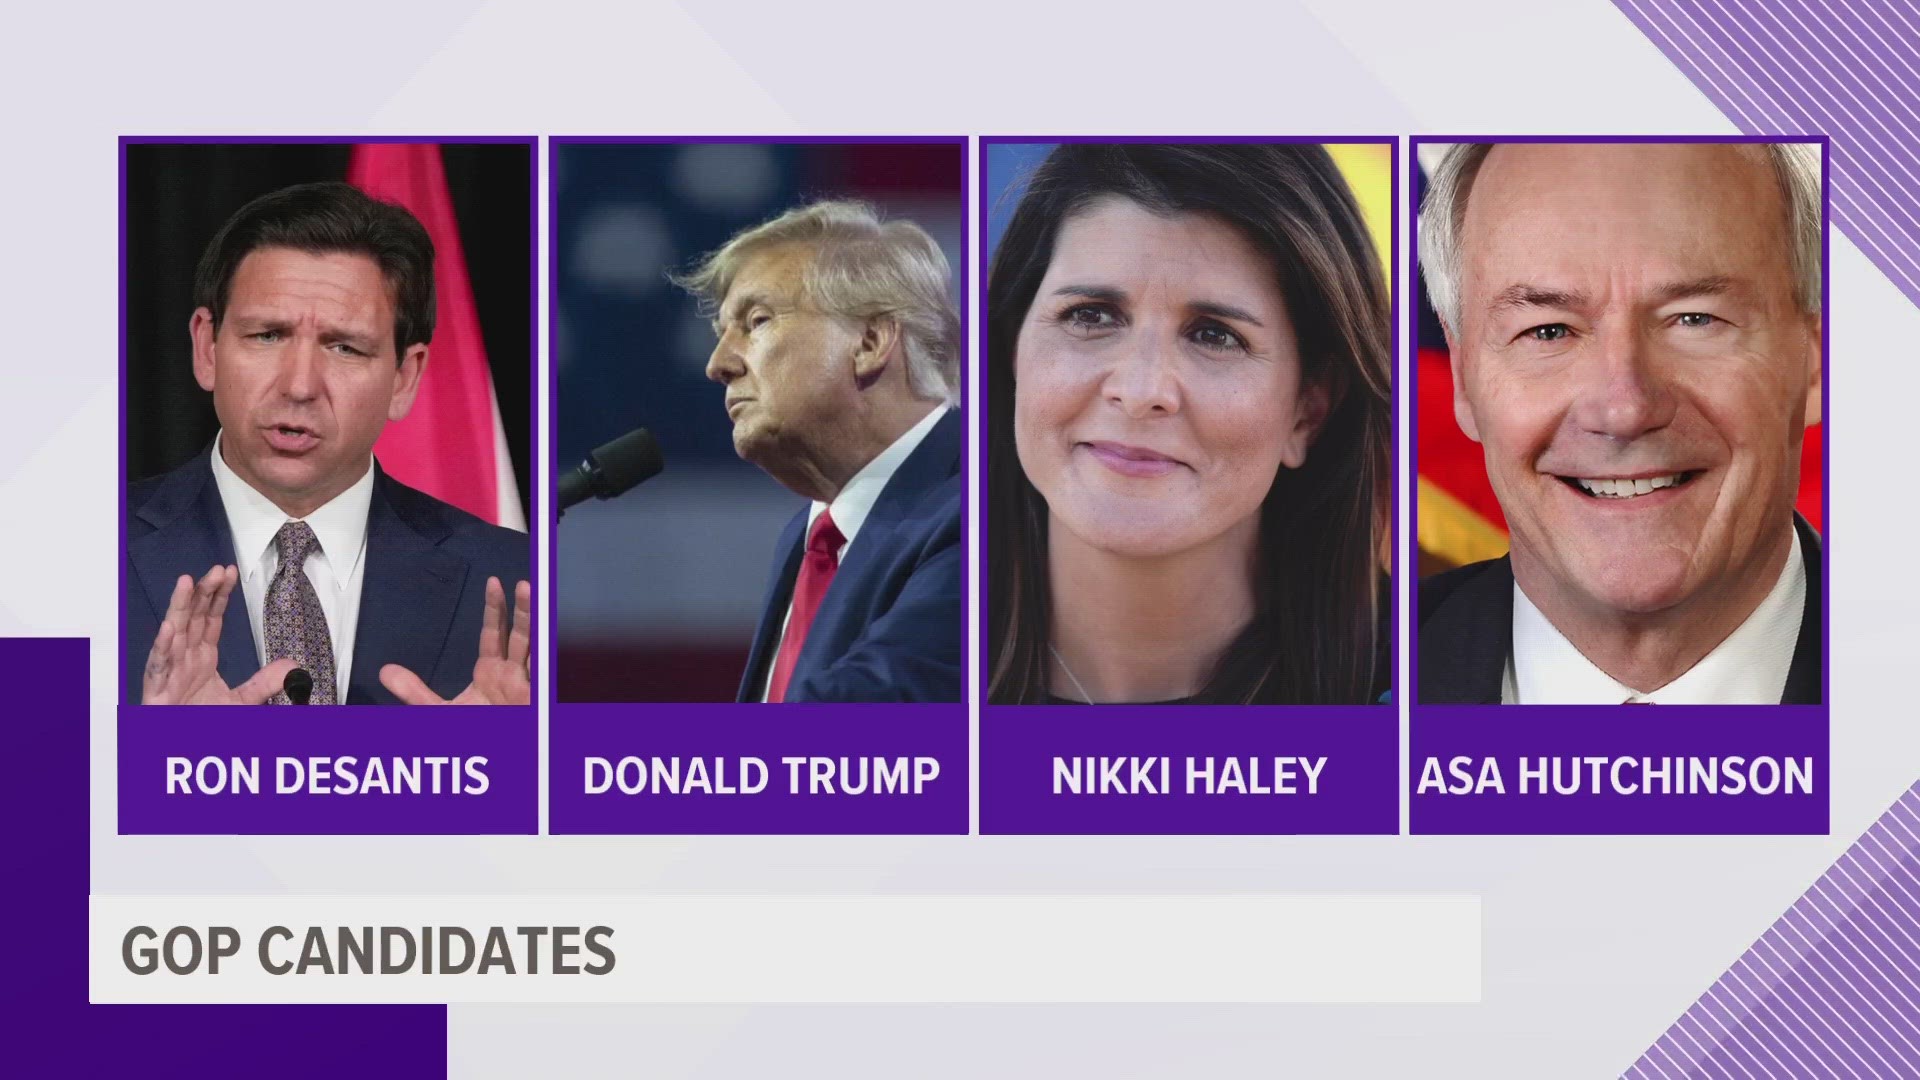 There are now eight GOP candidates running for the presidential nomination, and three Democrats.